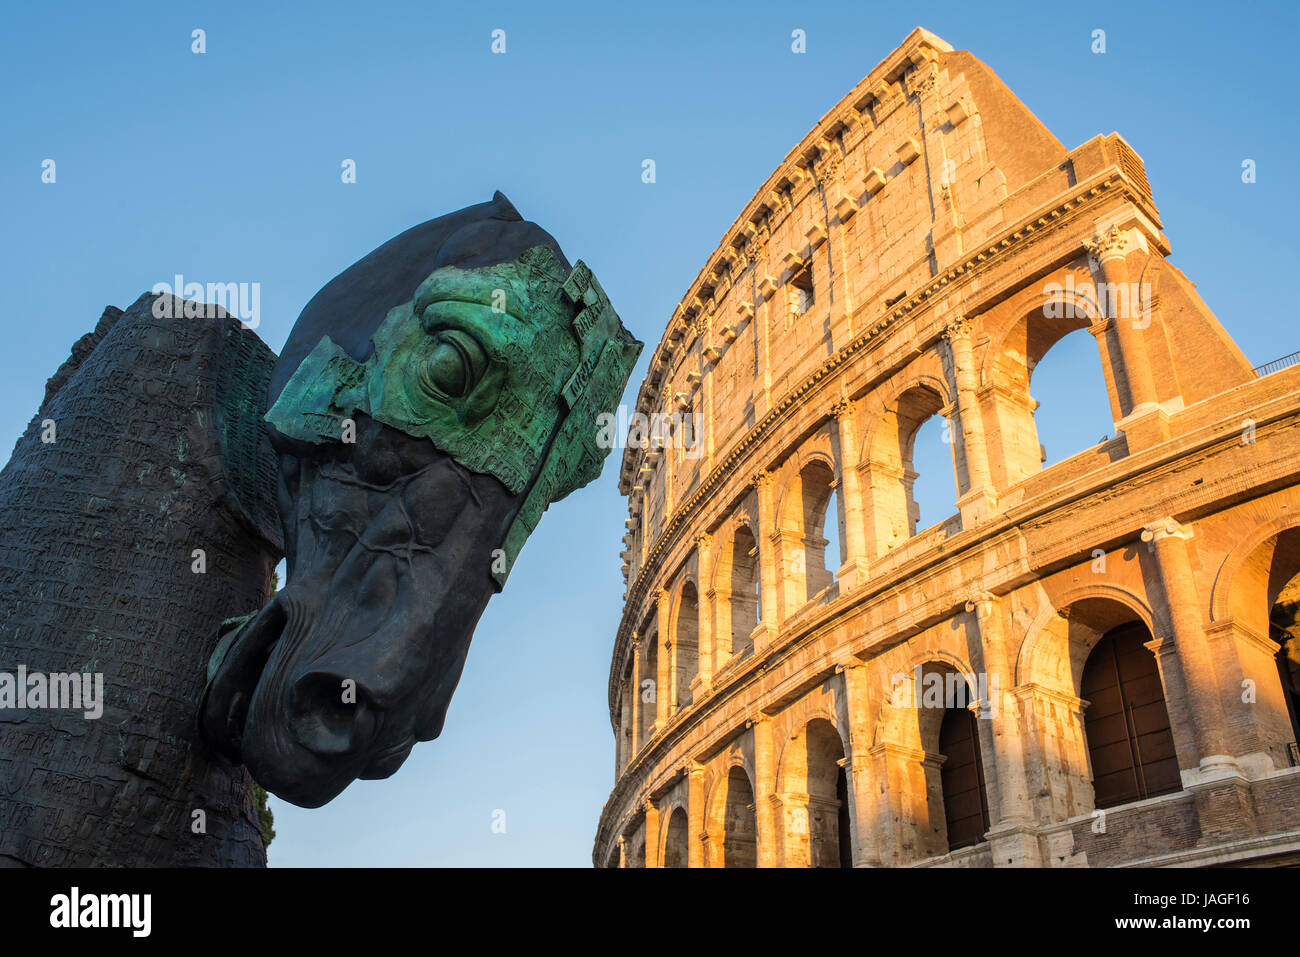 Horse sculpture 'Lapidarium - Waiting for the Barbarians' by Mexican artist Gustavo Aceves, next to the Colosseum in central Rome, Italy Stock Photo